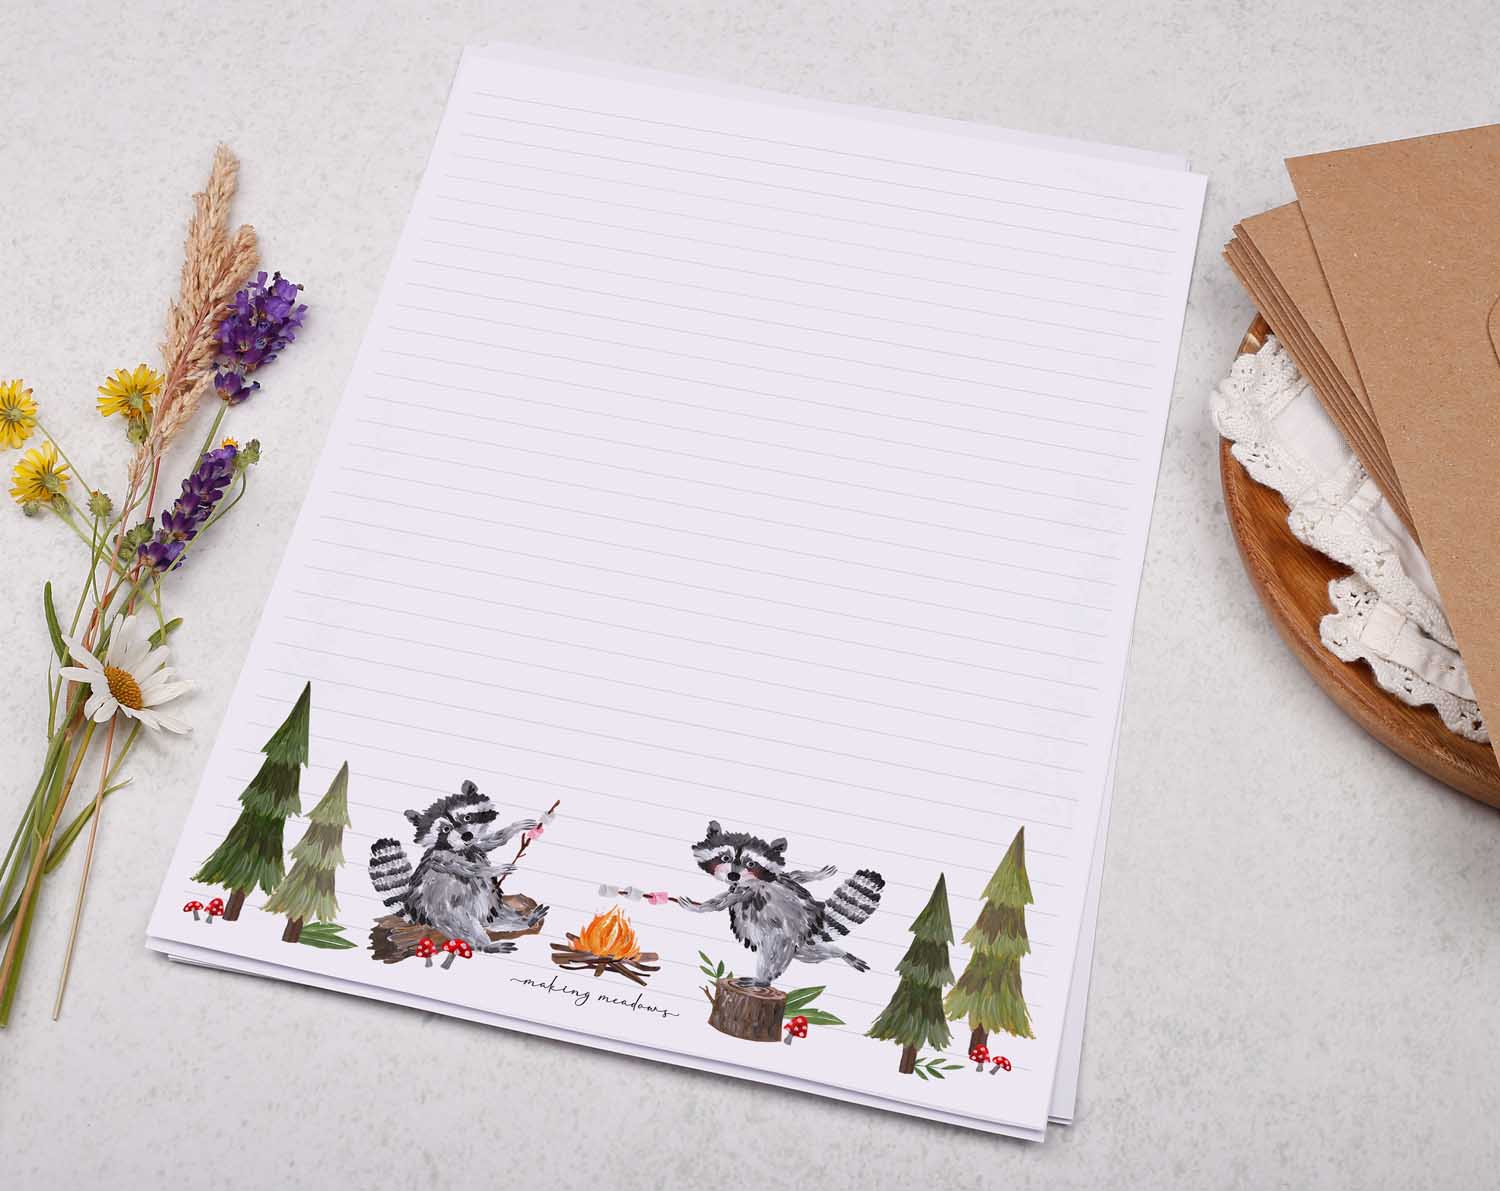 A4 letter writing paper sheets with a cute illustration of some raccoons camping in the forest.